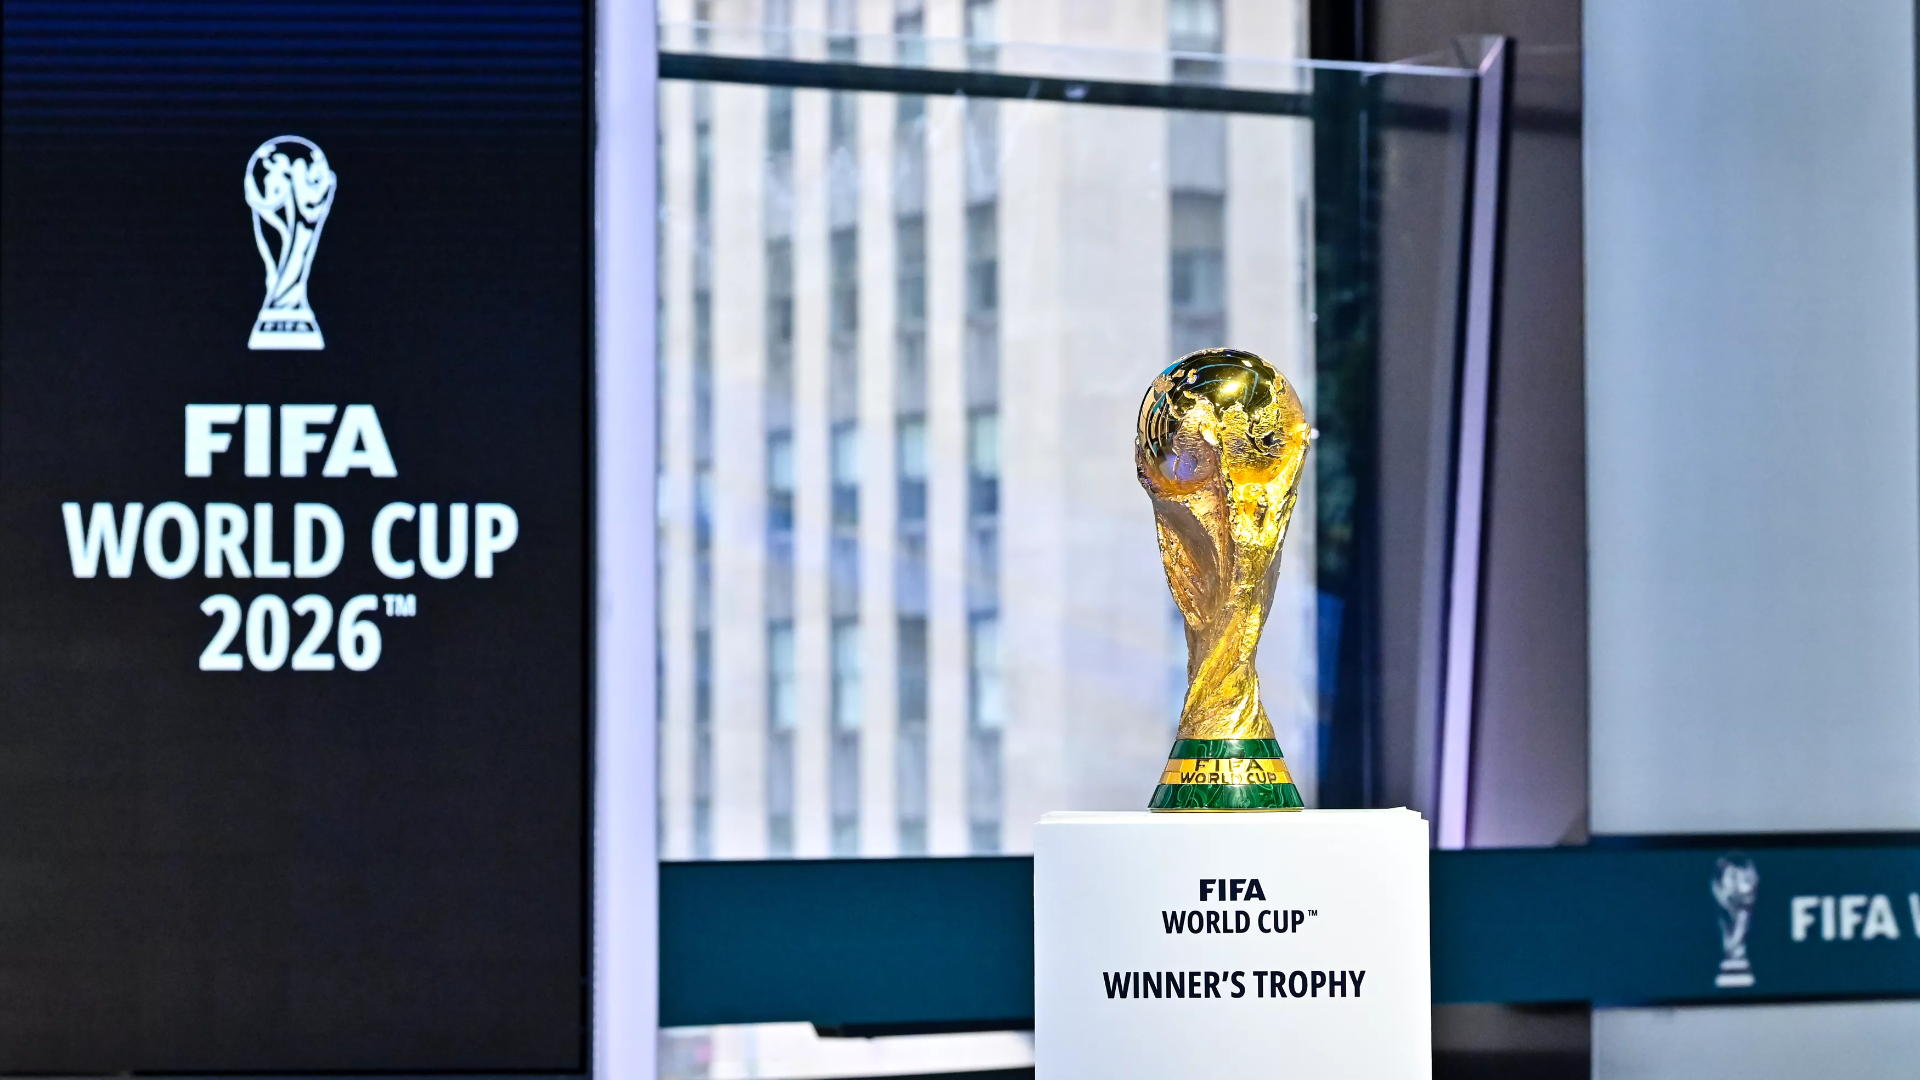 FIFA World Cup 2026: Everything You Need to Know